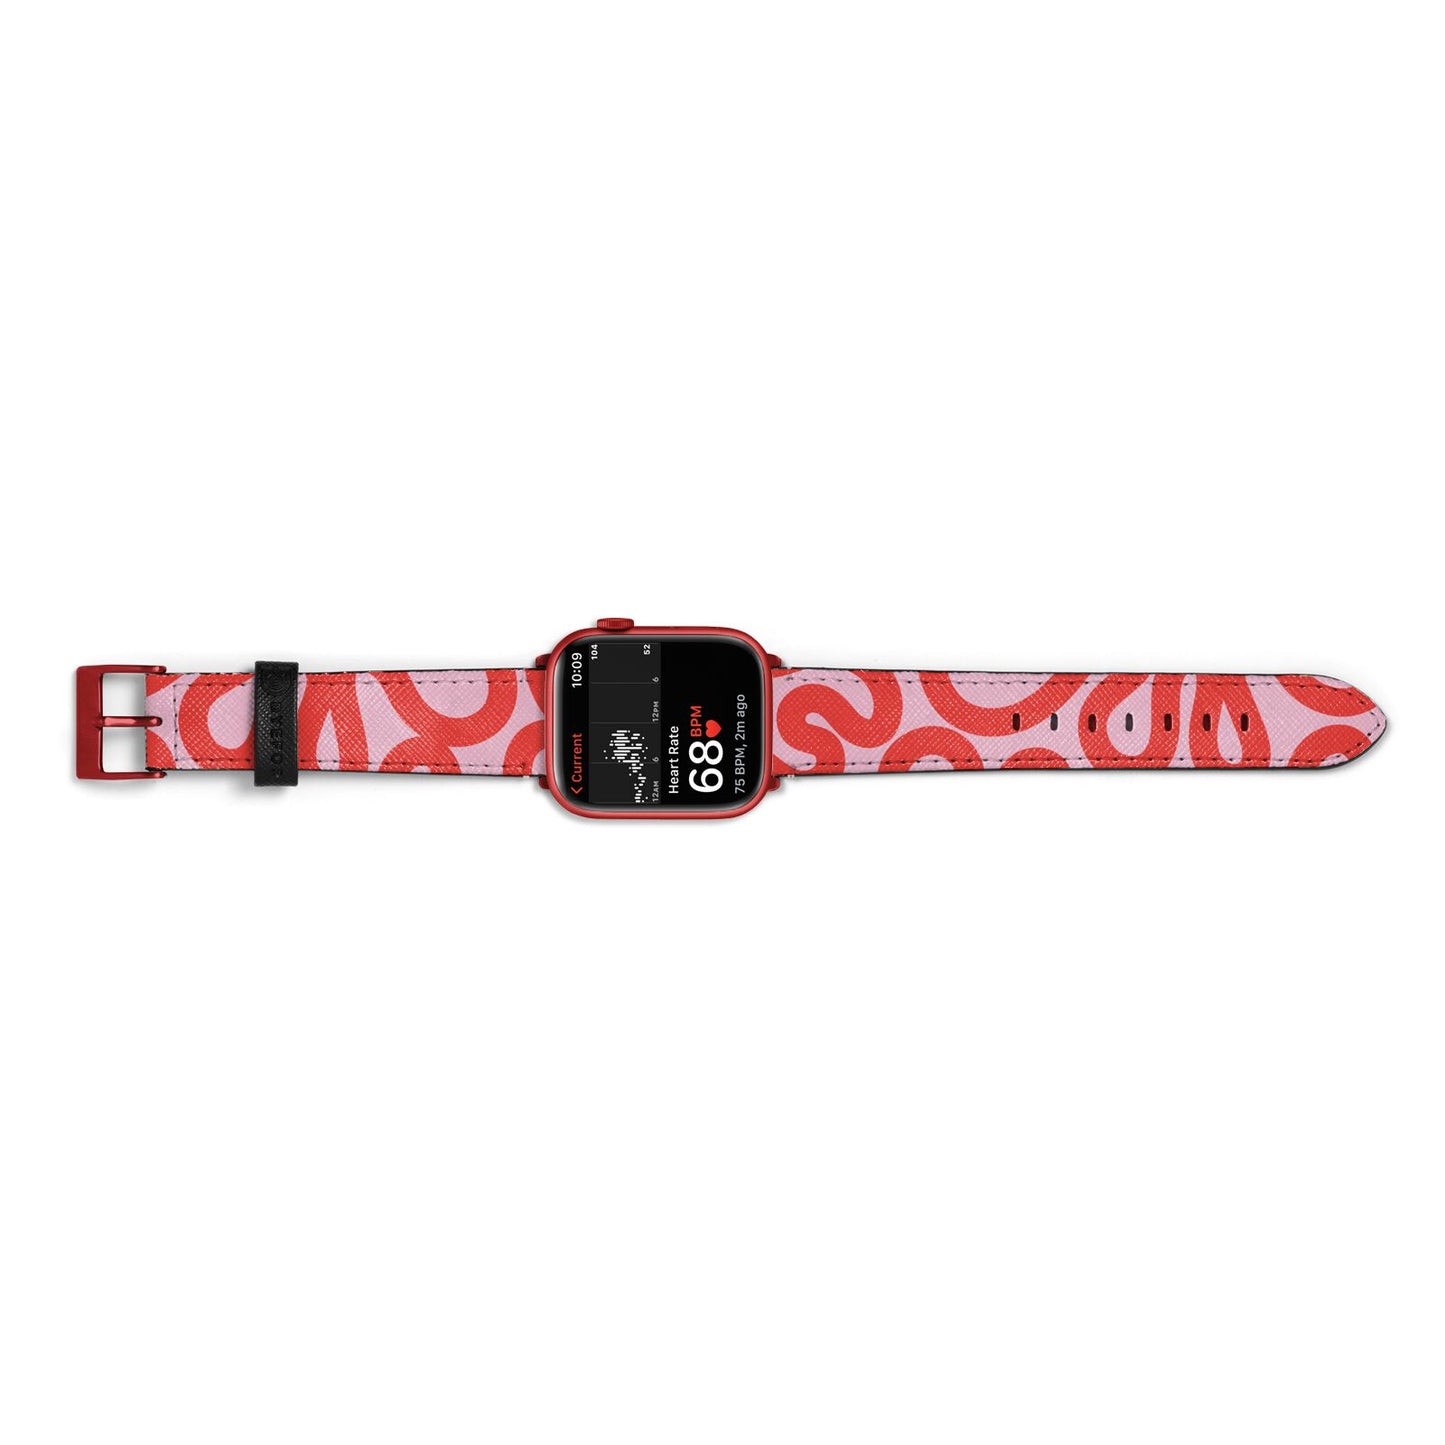 Squiggle Apple Watch Strap Size 38mm Landscape Image Red Hardware